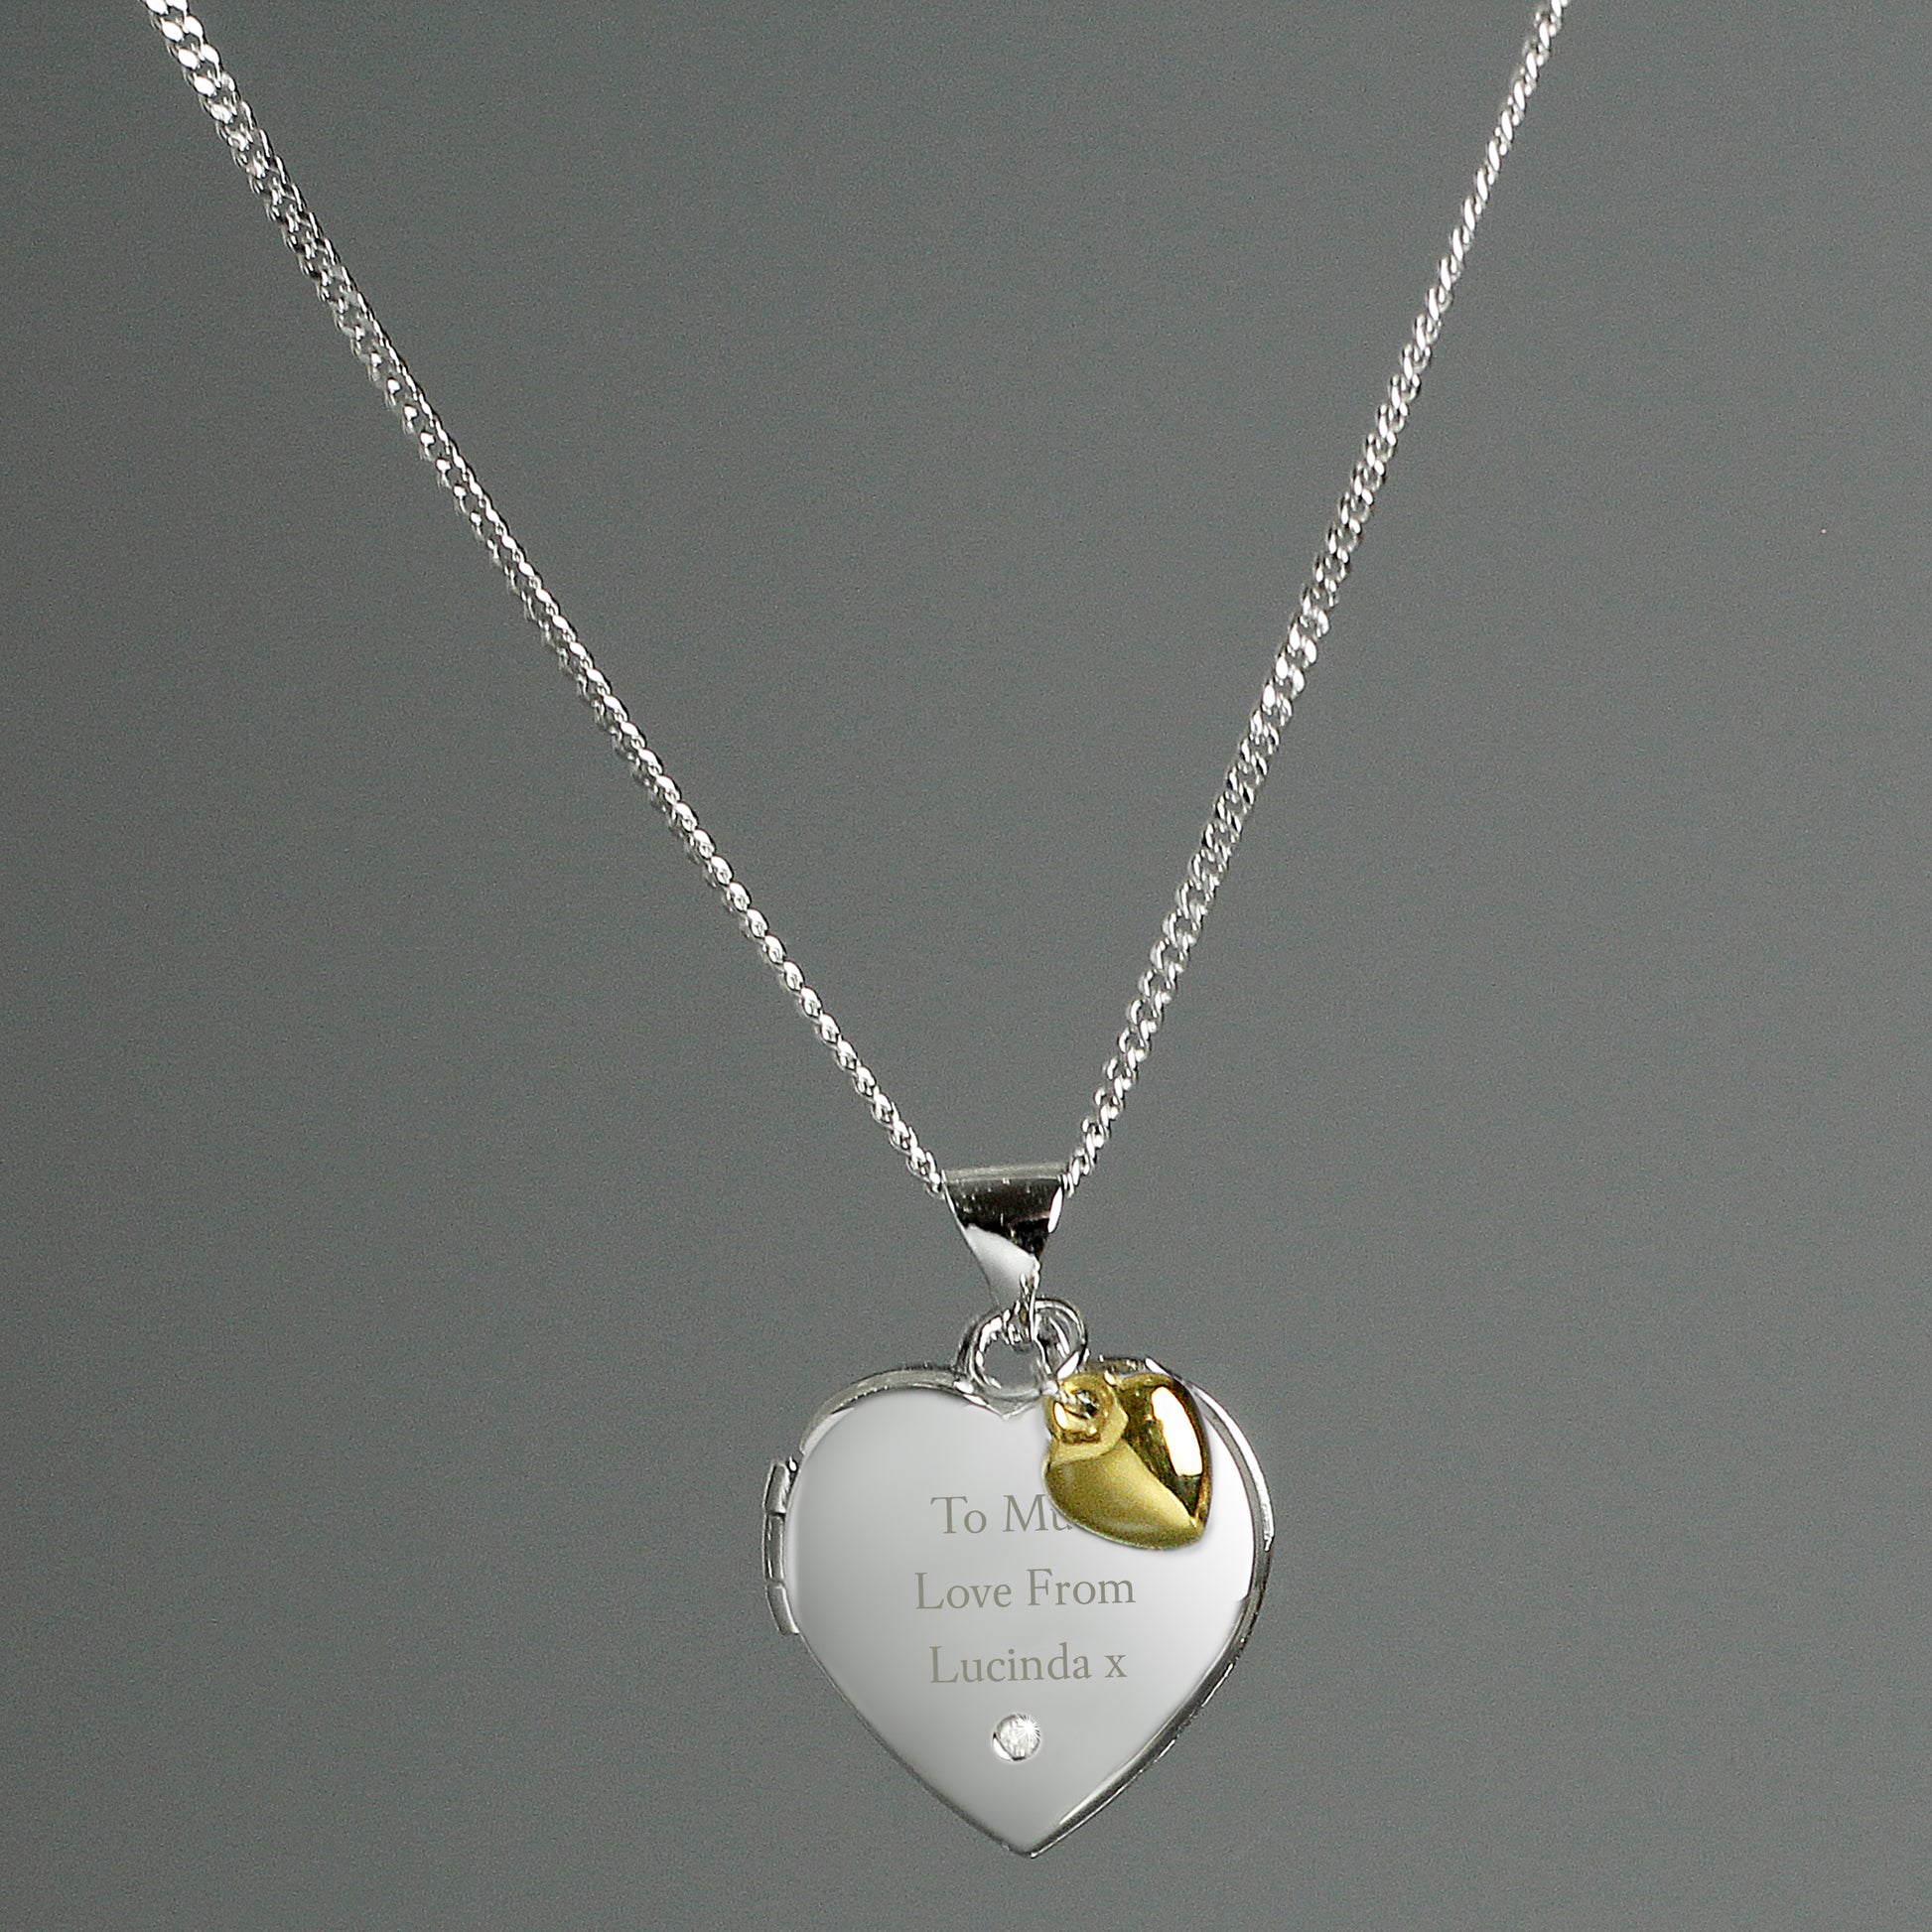 sterling silver heart shaped locket with engraved message and tiny gold heart